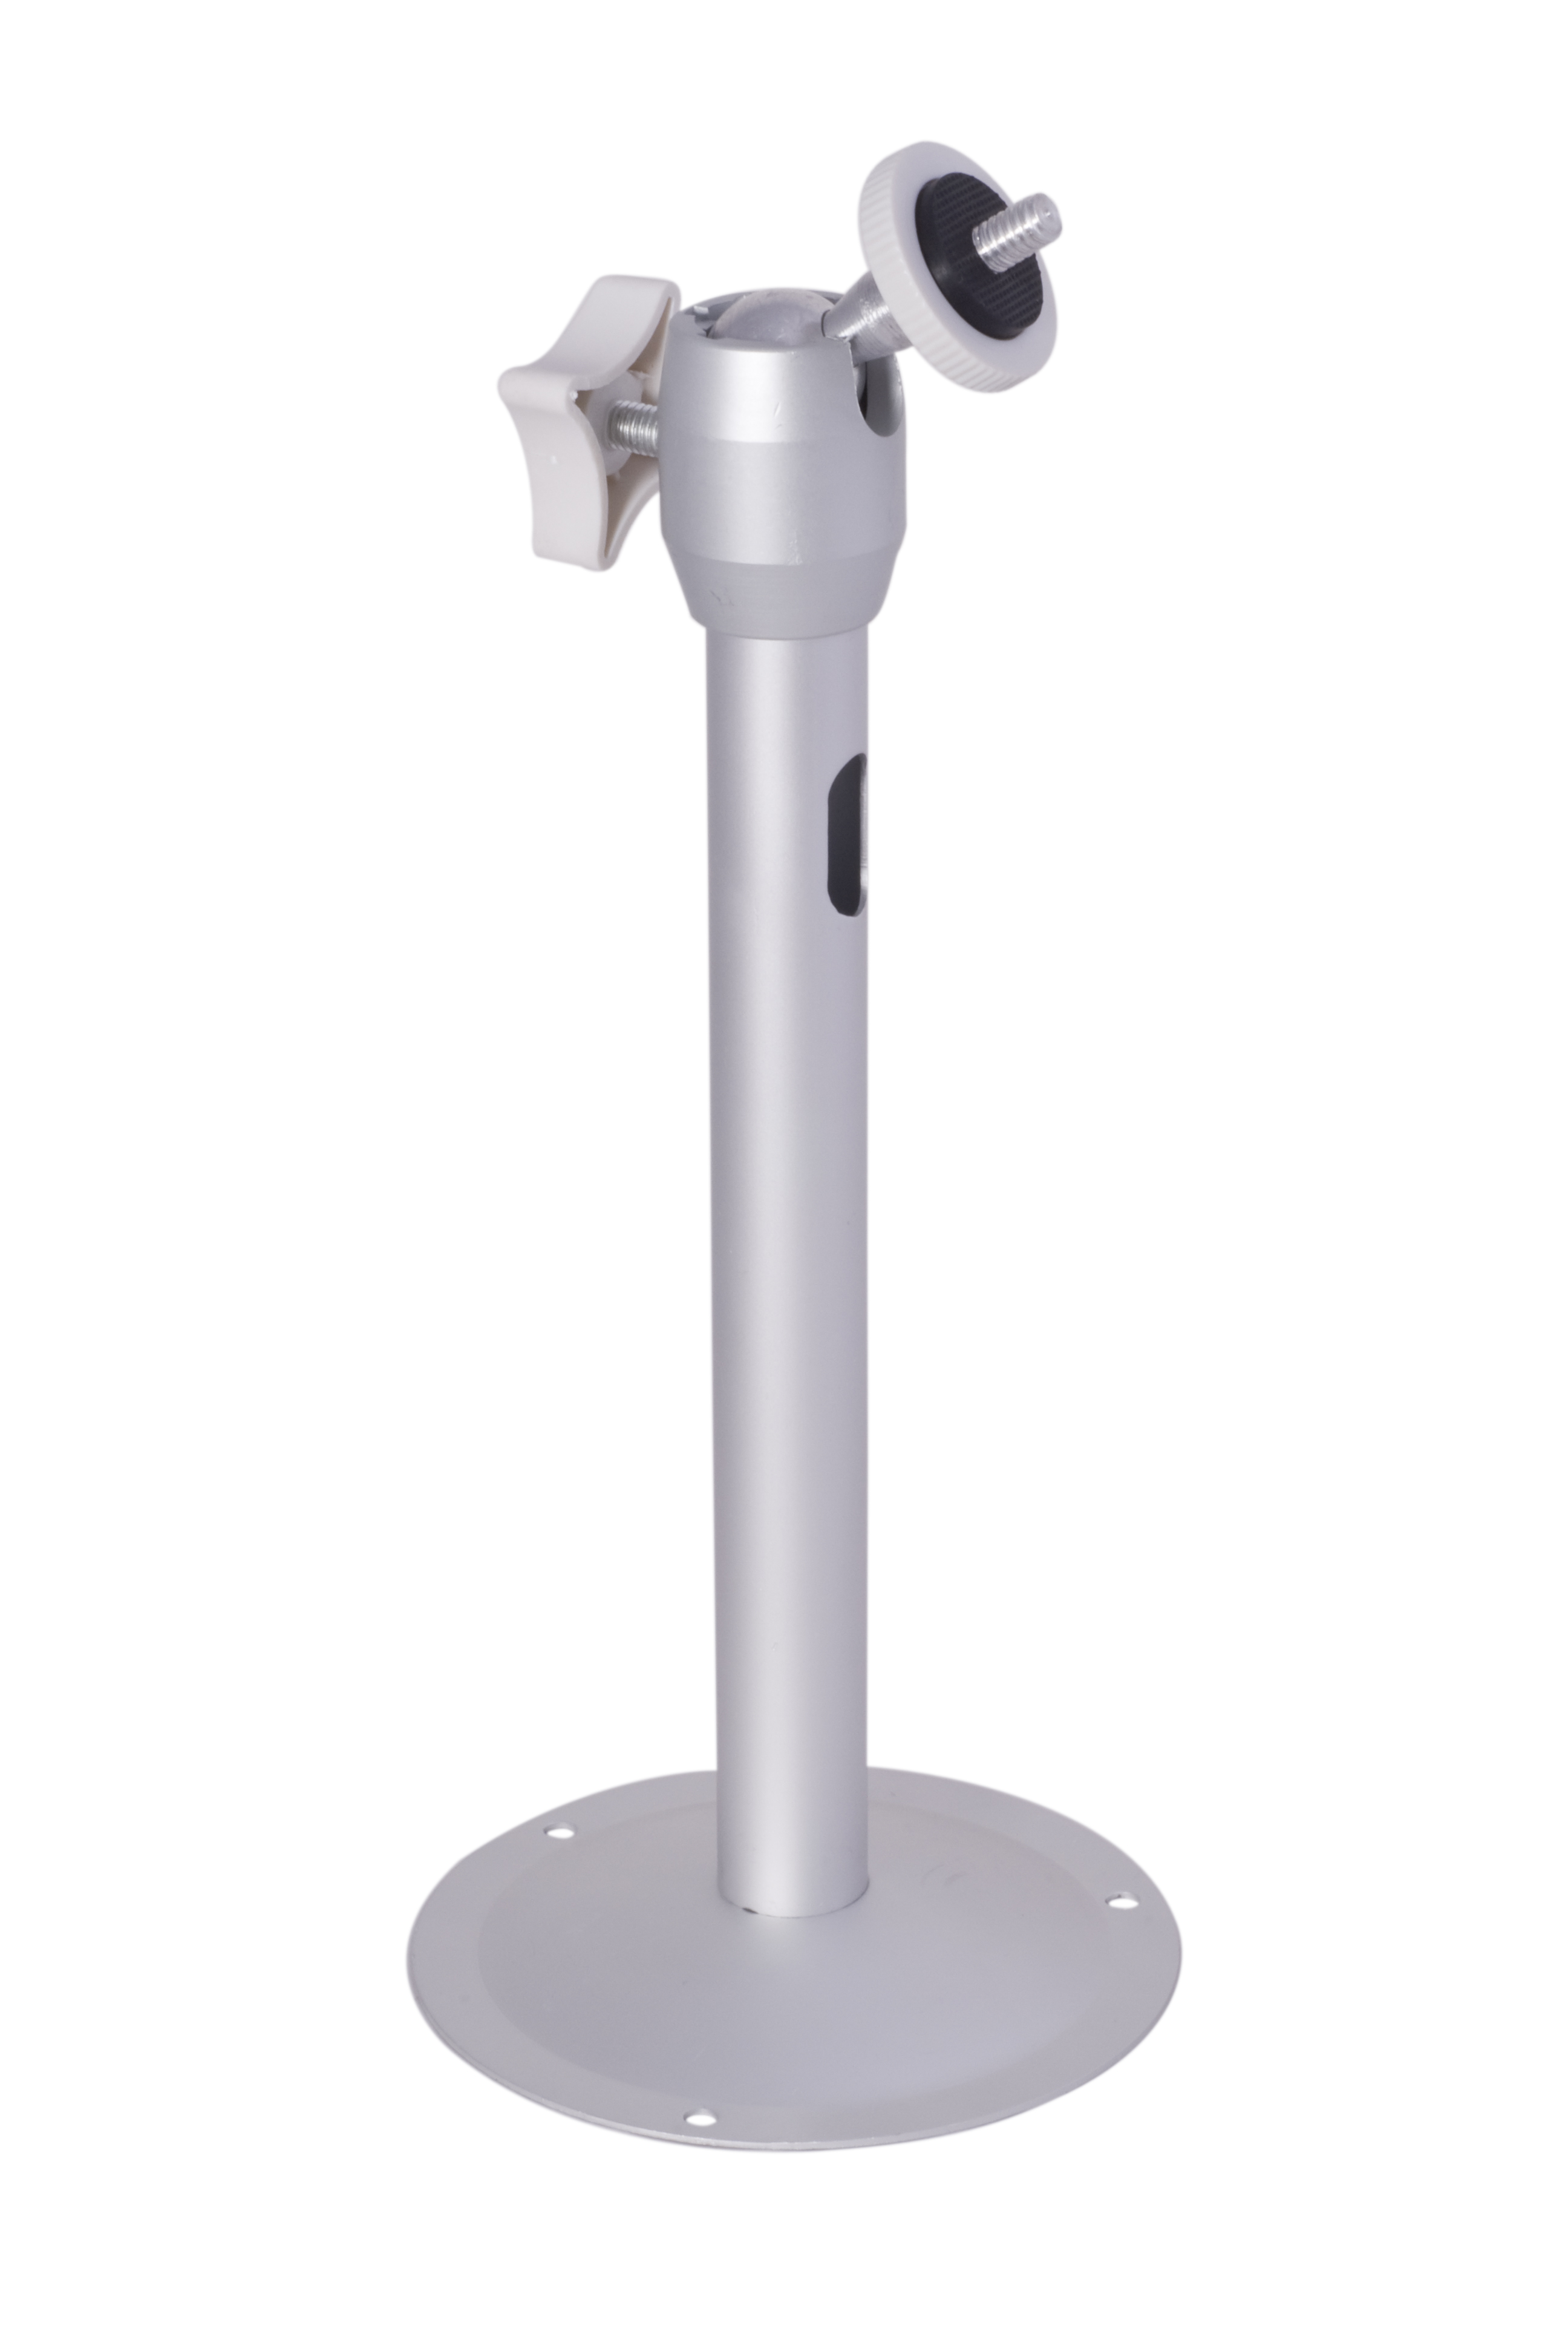 universal aluminum cctv wall/ceiling mount stand - Buy ...